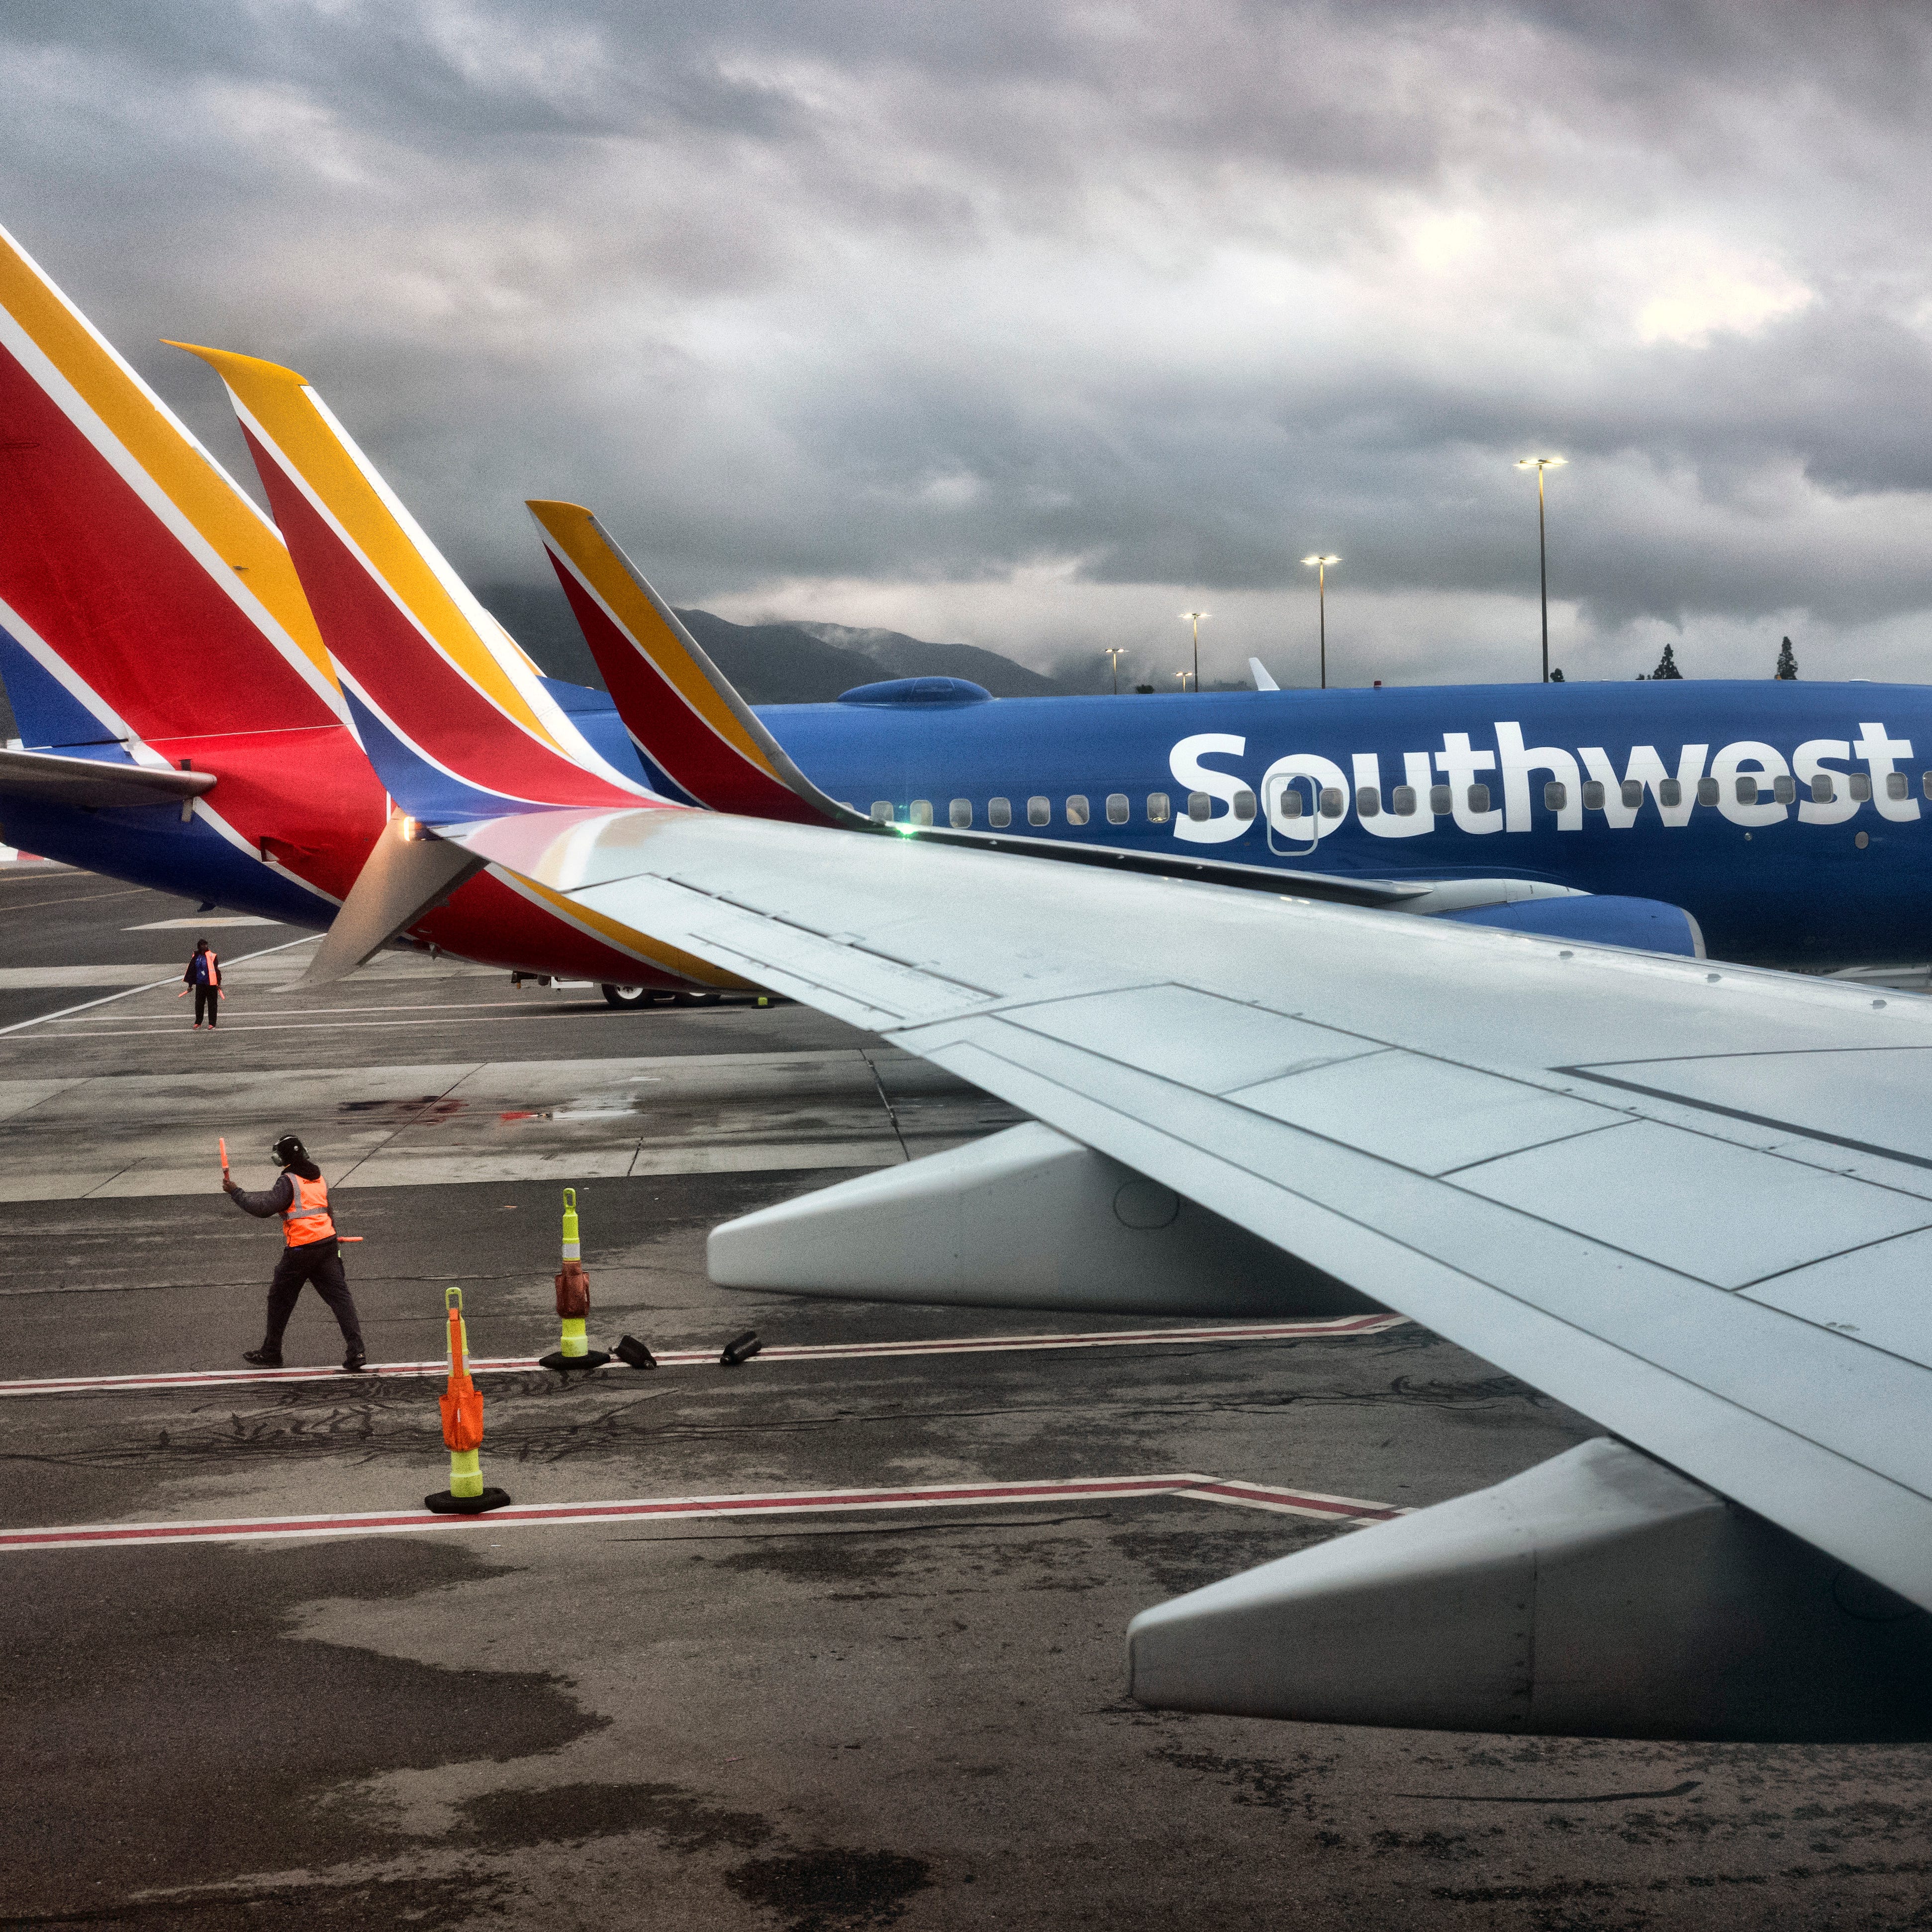 A Southwest Airlines ground crew directs a plane out of the terminal at Hollywood Burbank Airport in Burbank, Calif. on Tuesday, Feb. 14, 2023.